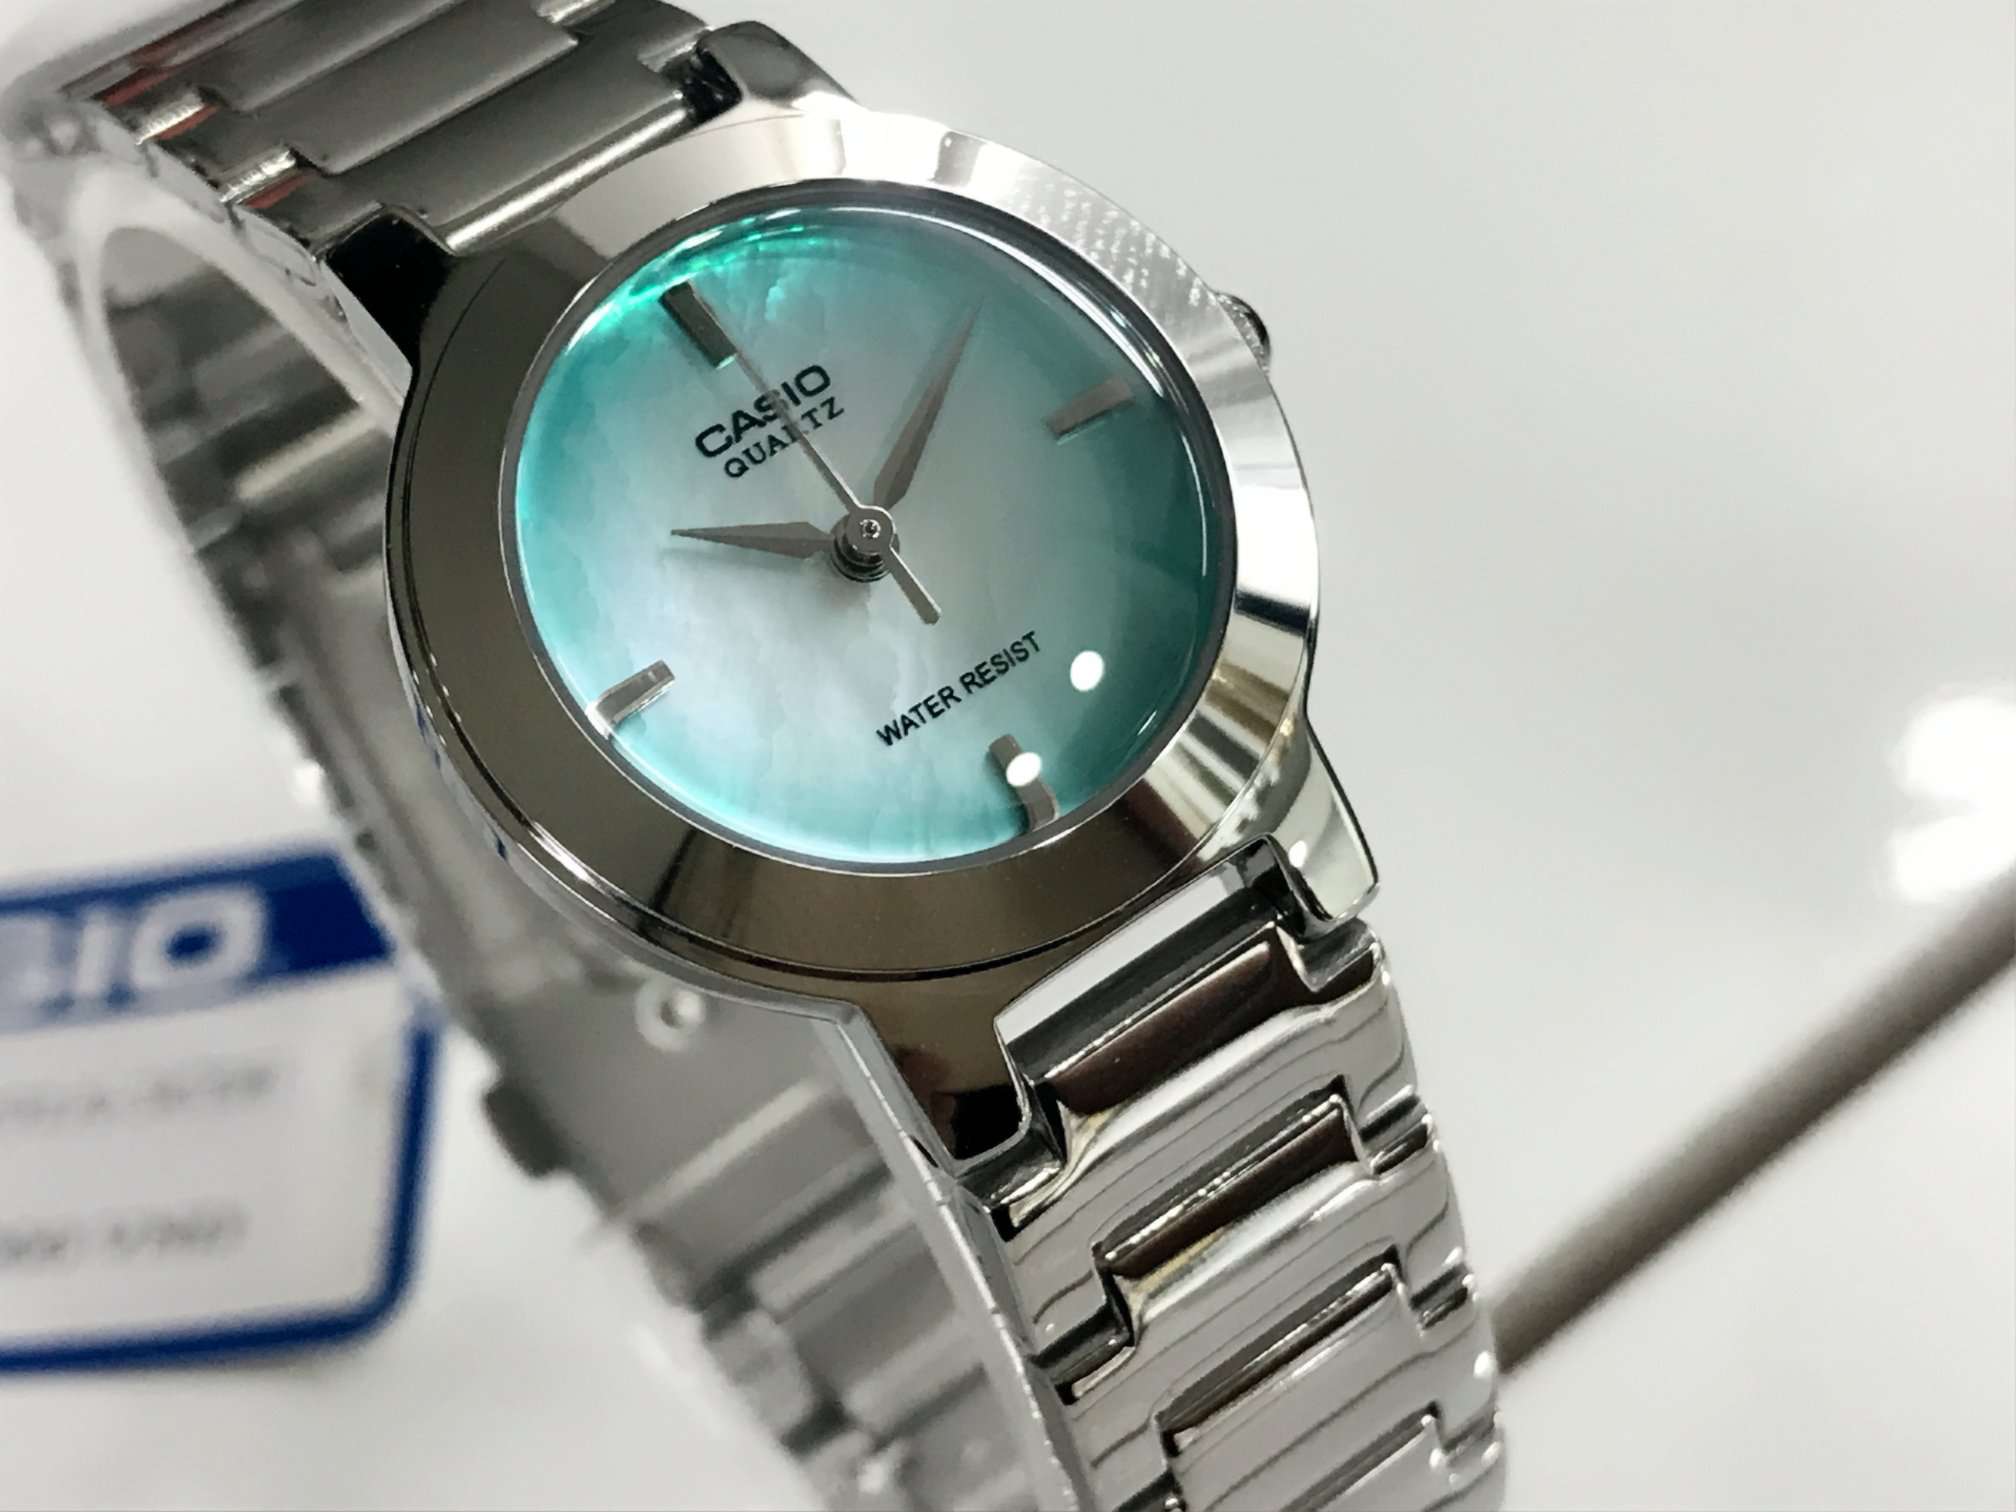 Casio LTP-1191A-3C Silver/Green Stainless Steel Watch for Women-Watch Portal Philippines